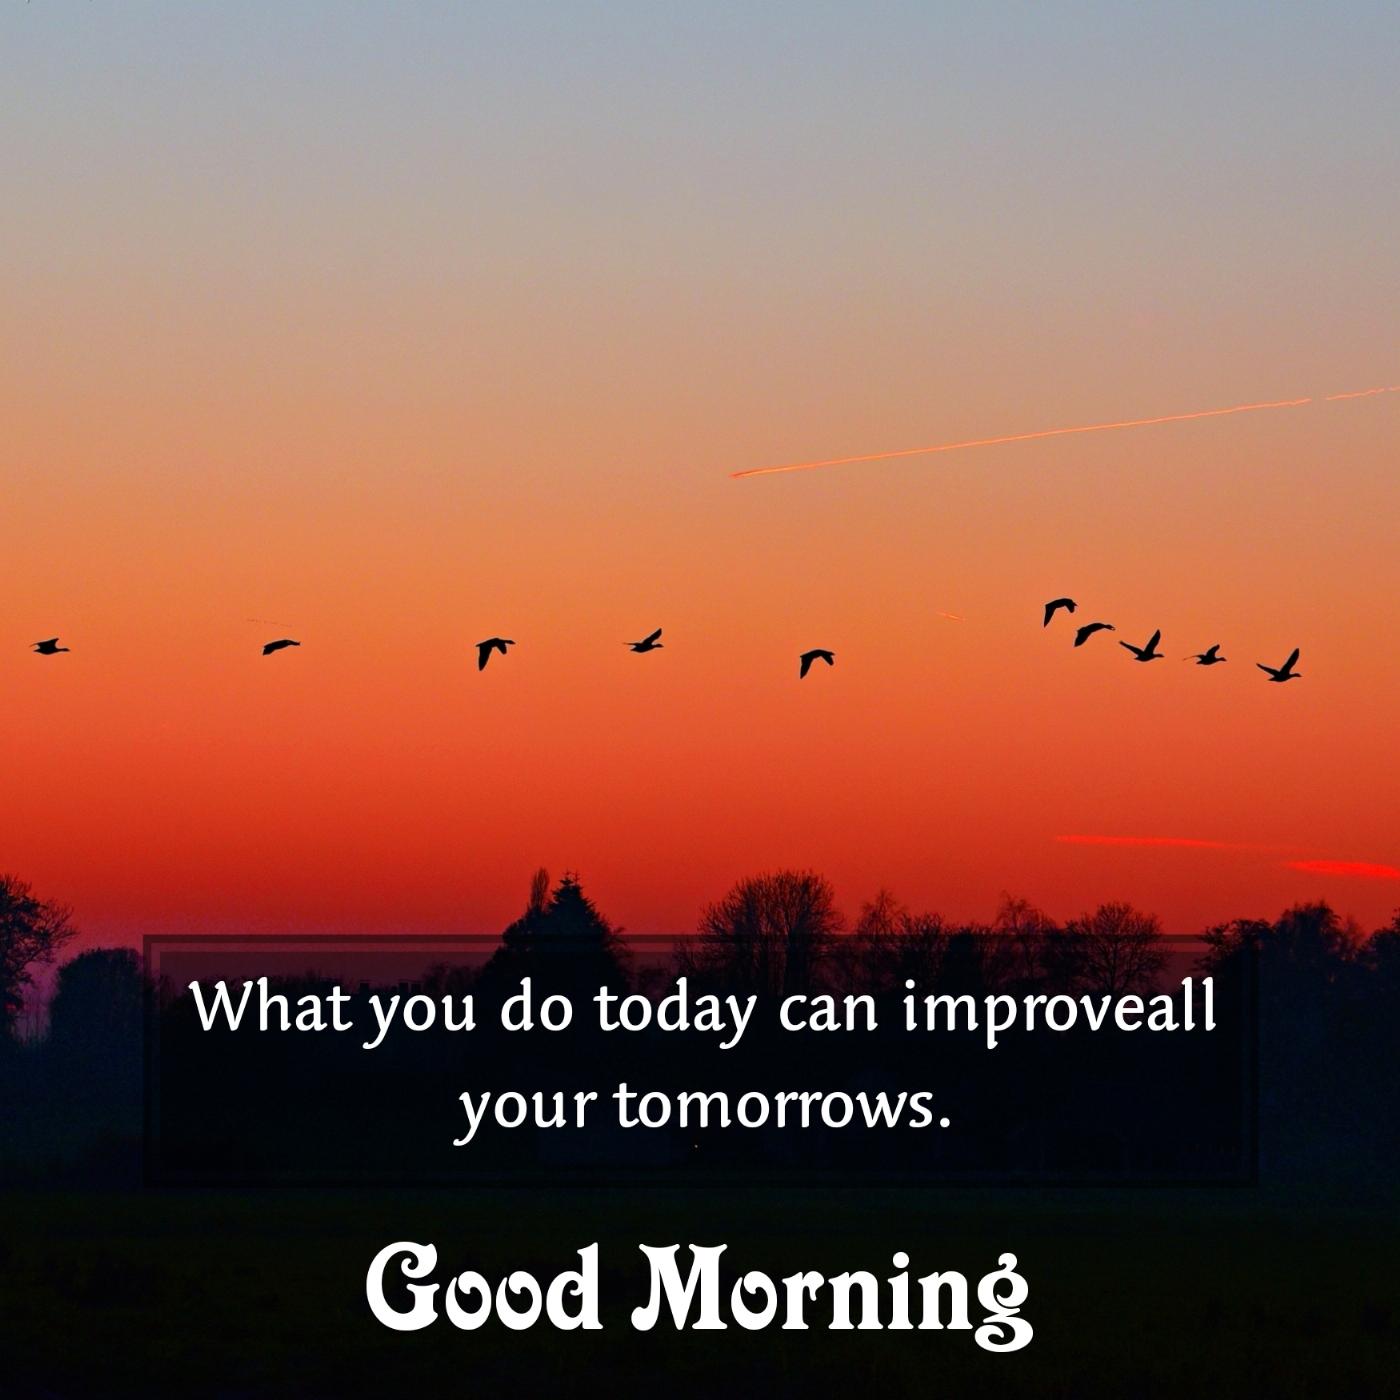 What you do today can improveall your tomorrows